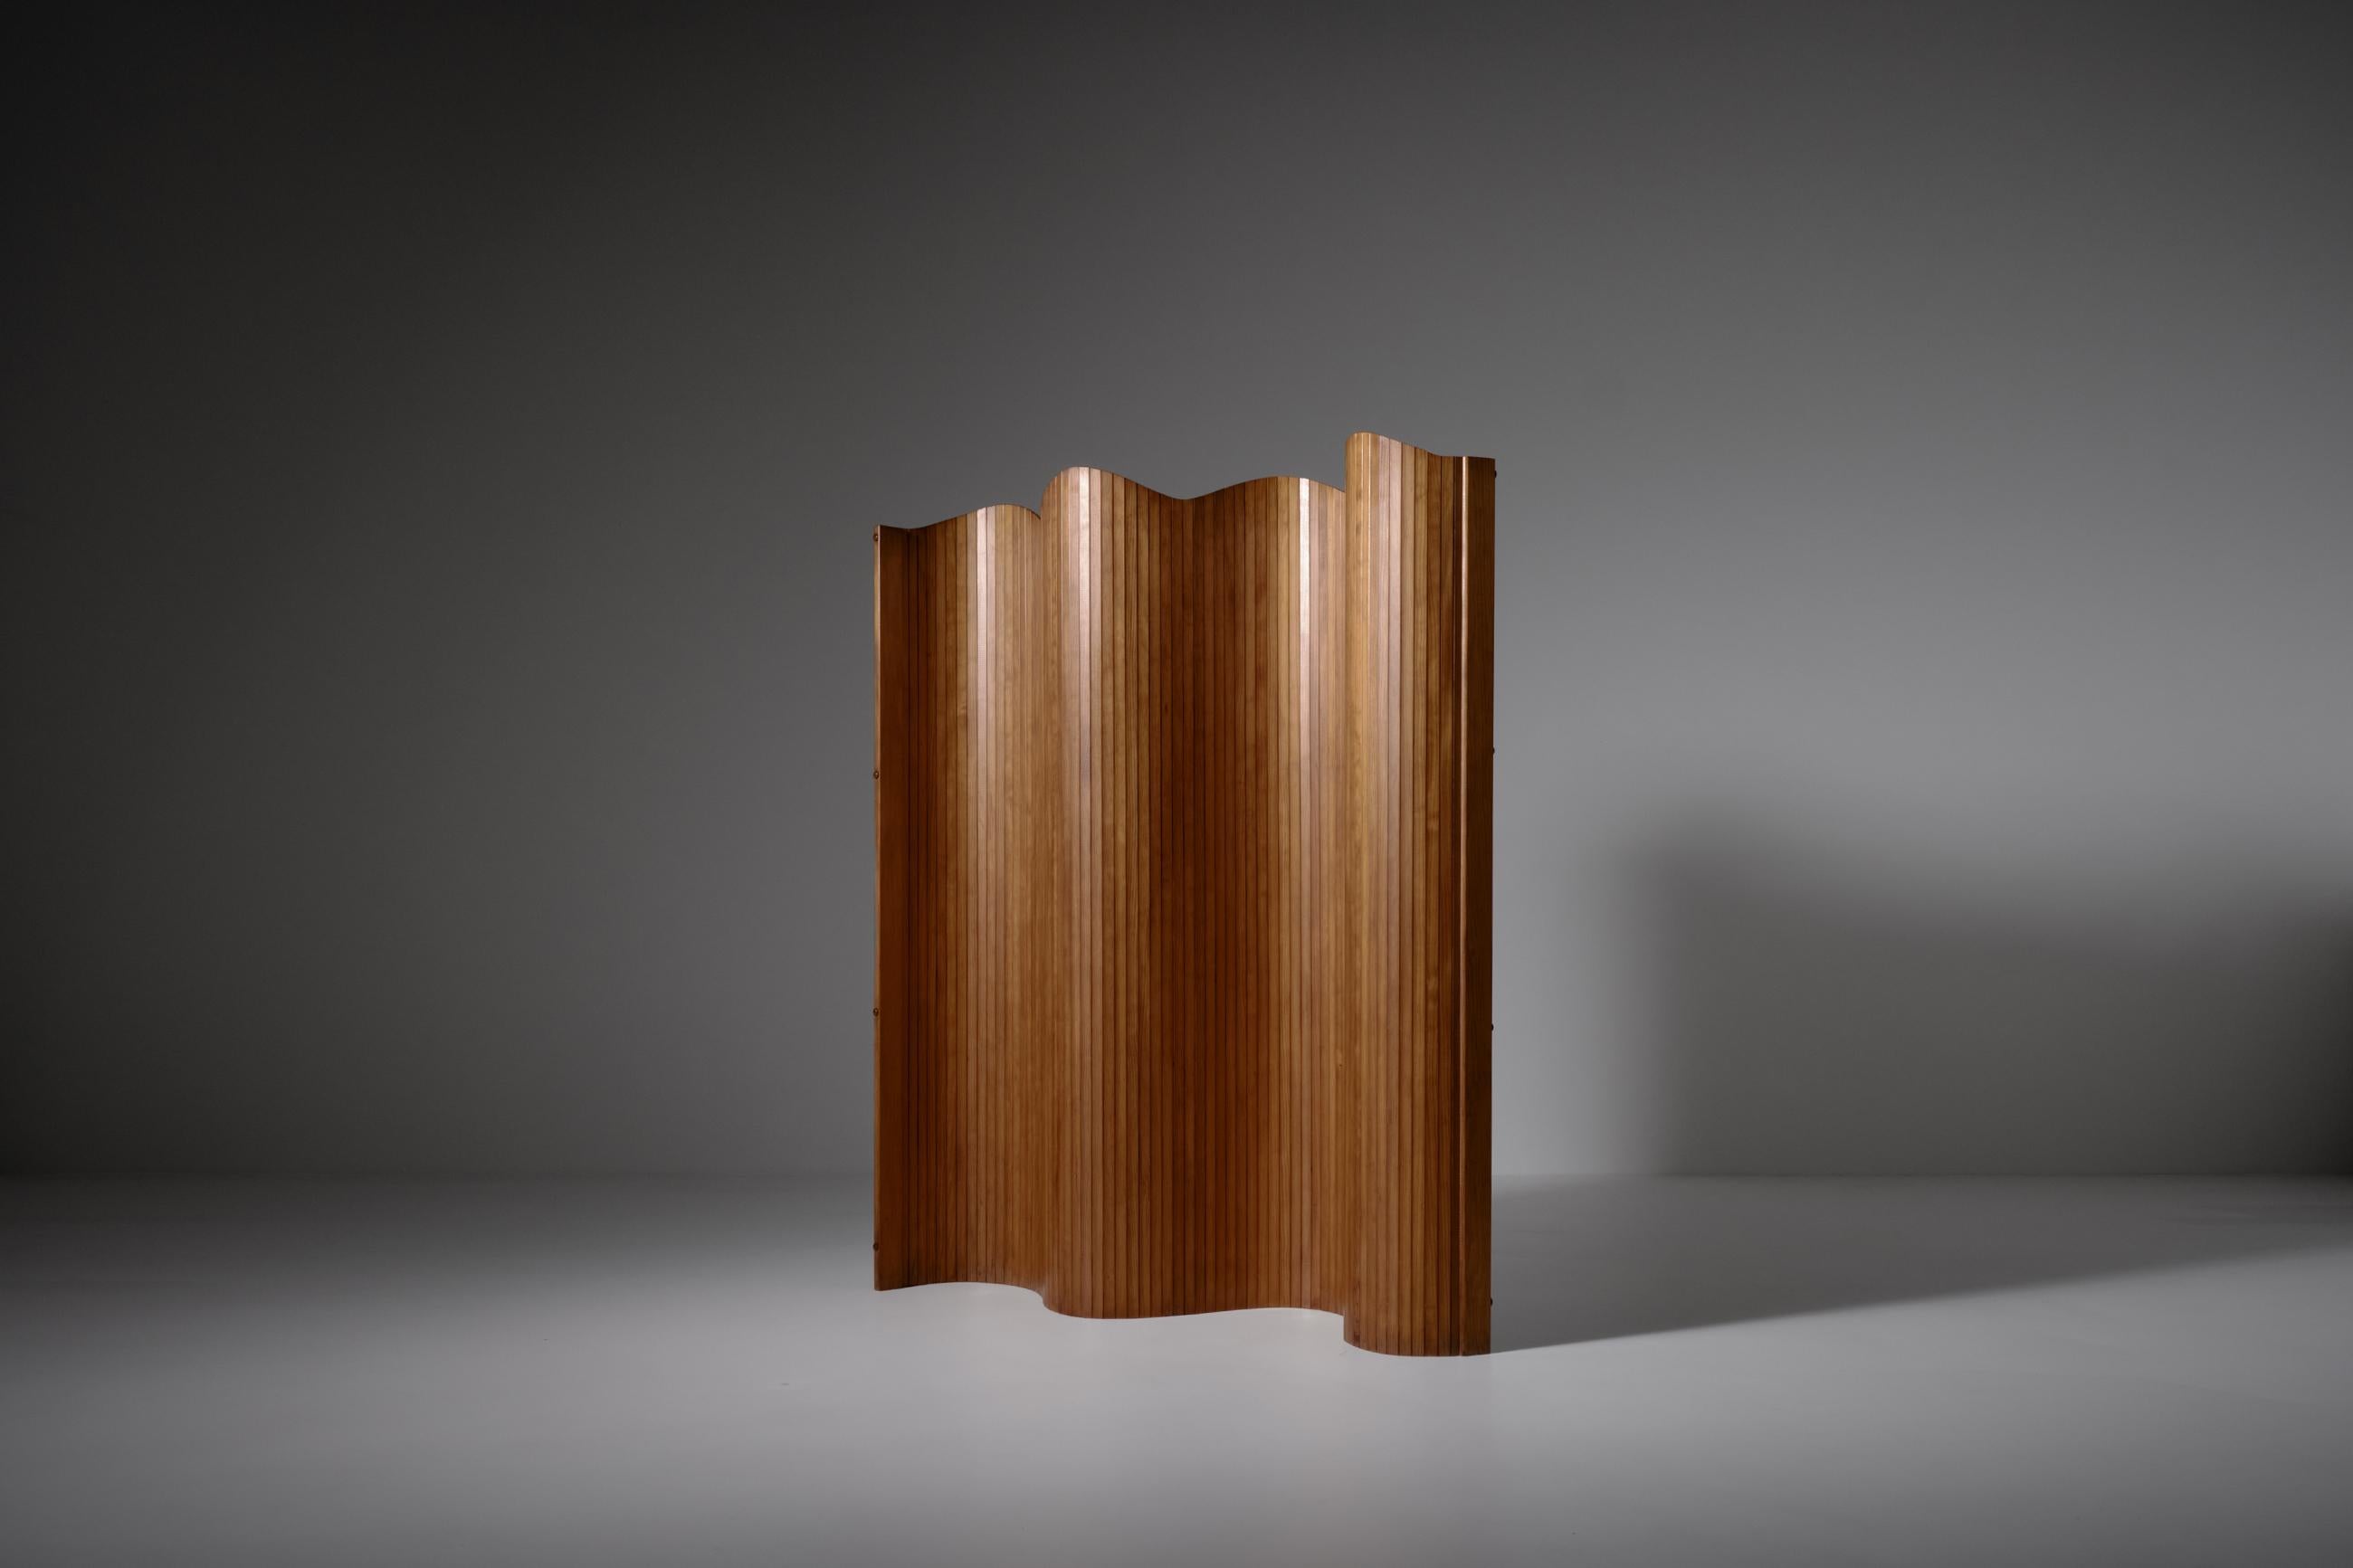 Large French tambour room divider, 1970s. Beautiful wavy shape made in solid pine with a beautiful exposed grain. The paravent can be placed in plenty shapes creating a very interesting divider or background. In very good condition with a nice warm